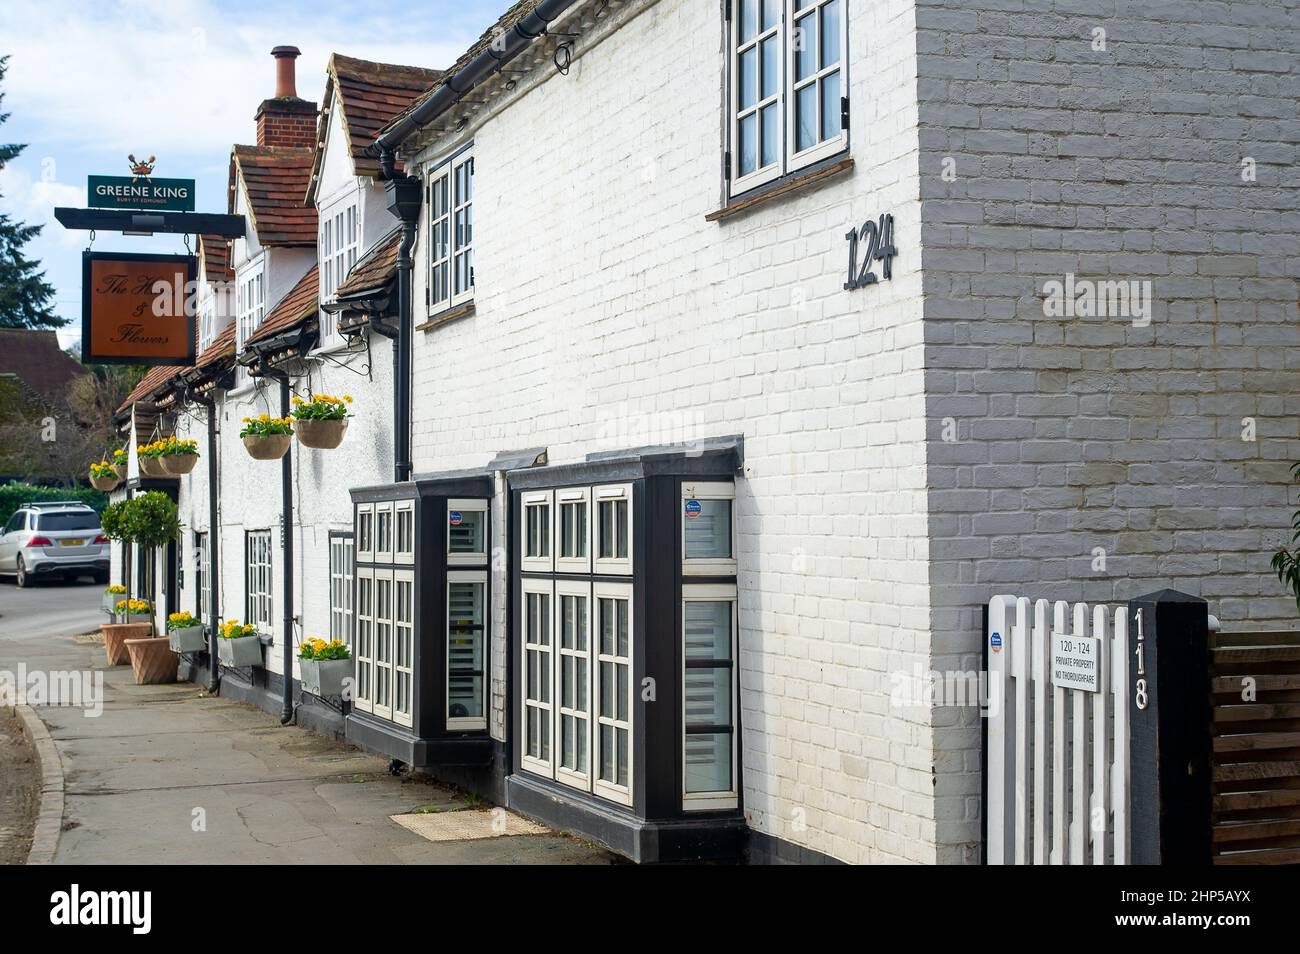 Marlow, Buckinghamshire, UK. 17th February, 2022. The Hand & Flowers pub and restaurant run by celebrity chef Tom Kerridge has retained it's two Michelin stars for another year. Credit: Maureen McLean/Alamy Stock Photo